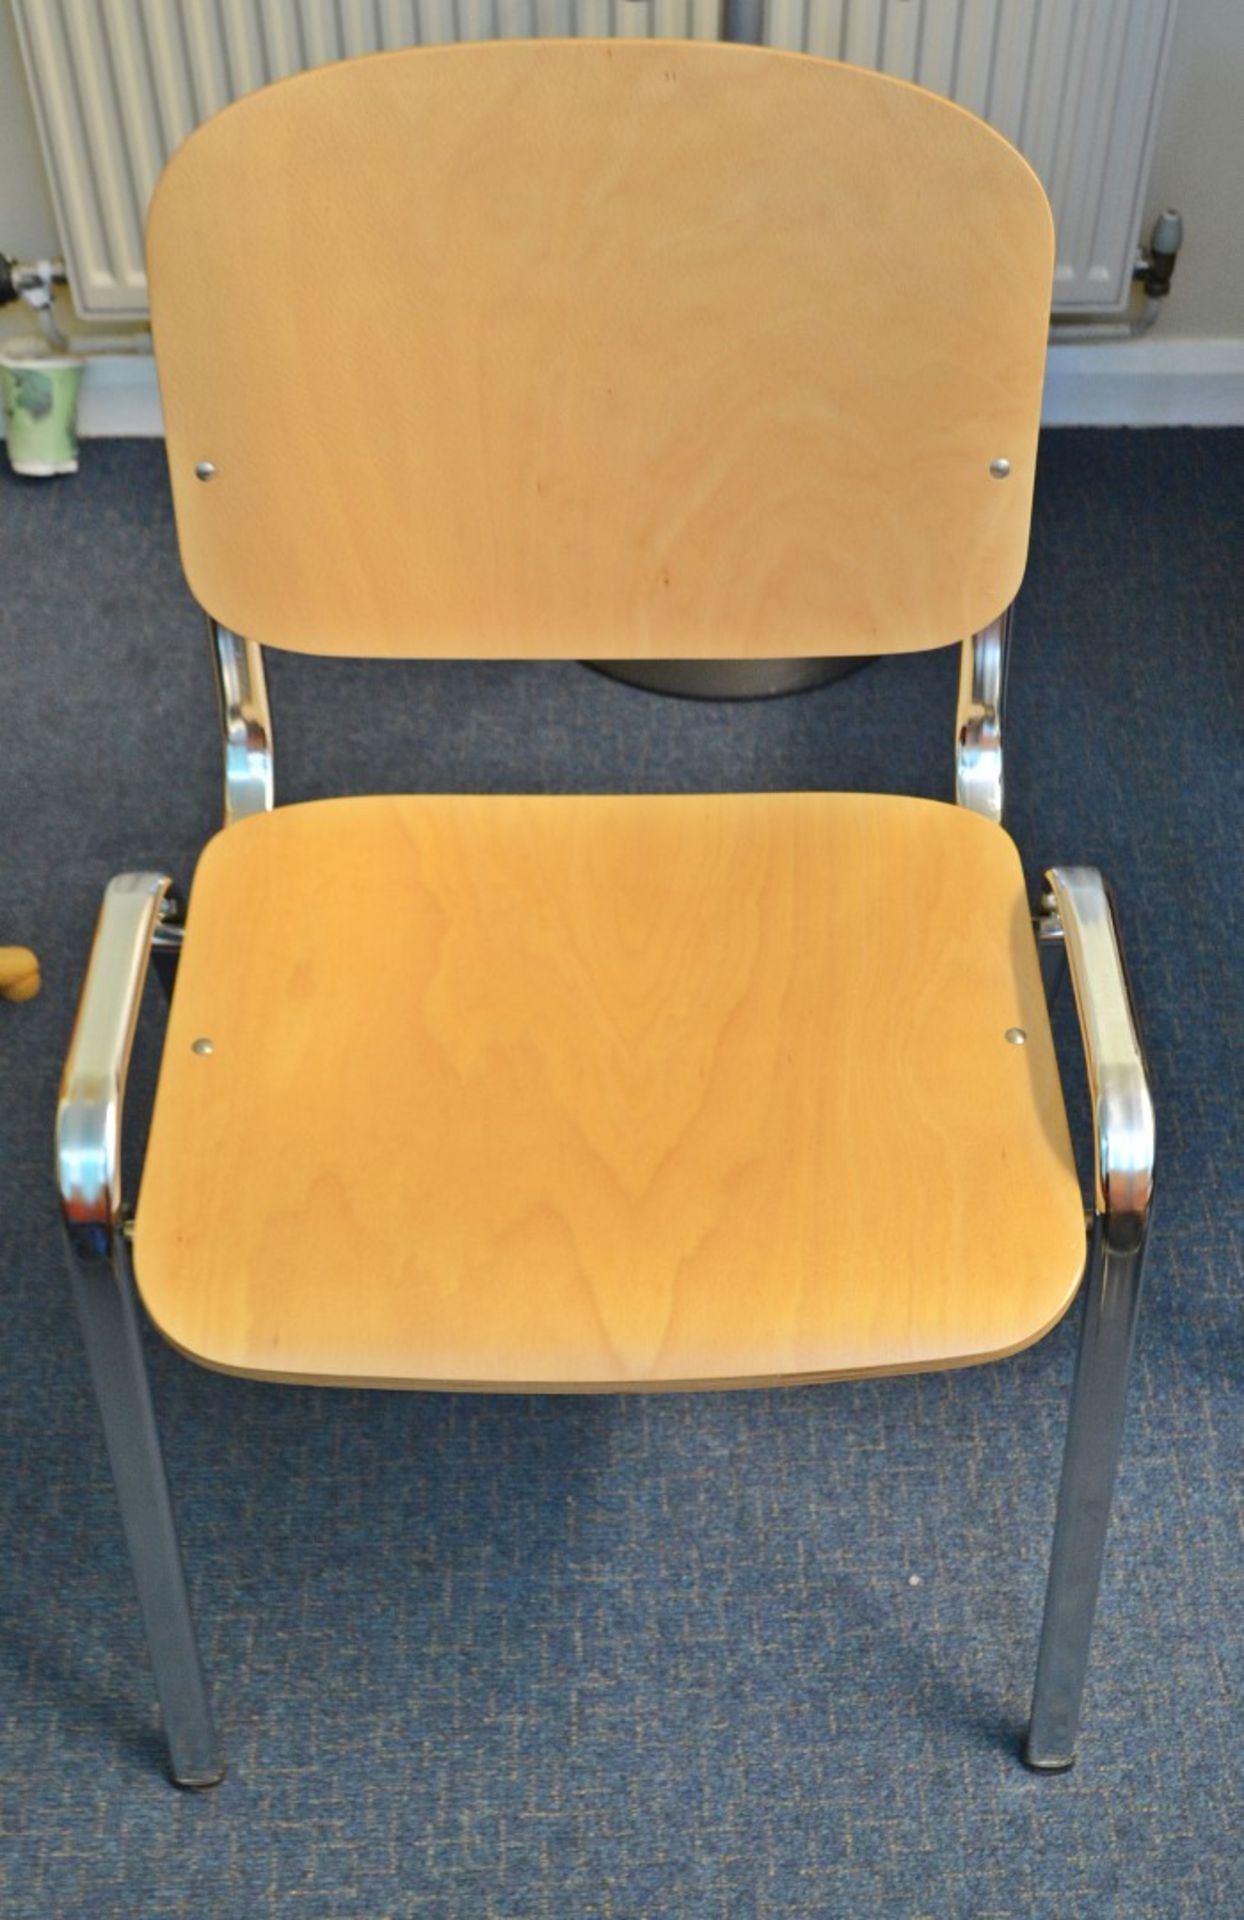 1 x Lot Of Various Office Chairs - Ref: VM559, 562, 563, 564/A16 B1 - CL409 - Location: Wakefield